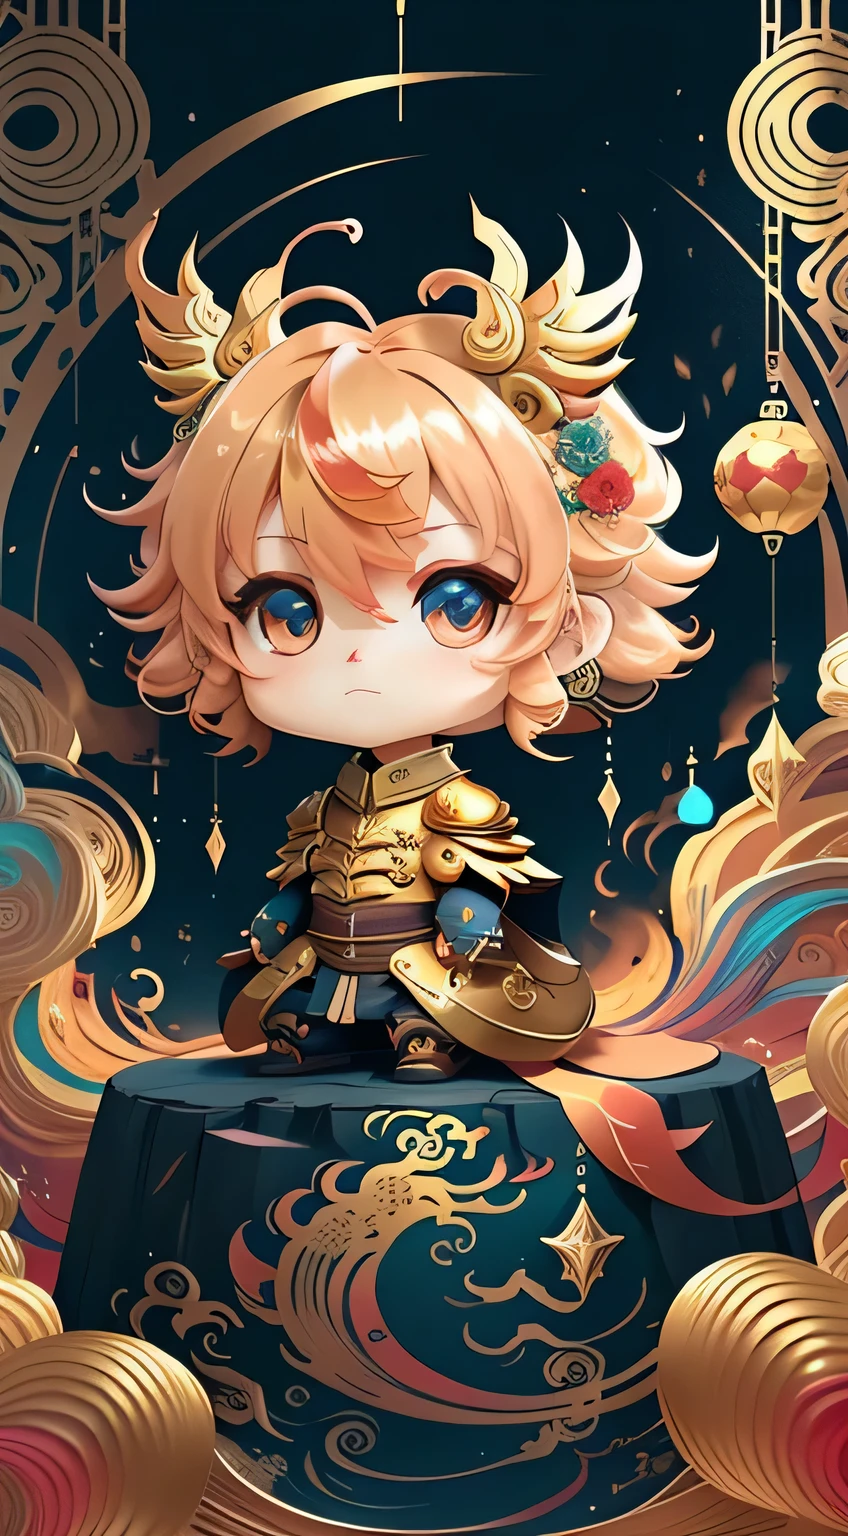 (best posture),(best angle), (better representation), golden dragon,Geometric wall portrait, artistically, chibi,New Year Yang 08k, beautiful turd, dyeing,
Major works, upscale, top quality, official art, Beautiful and beautiful, Colorful hair,